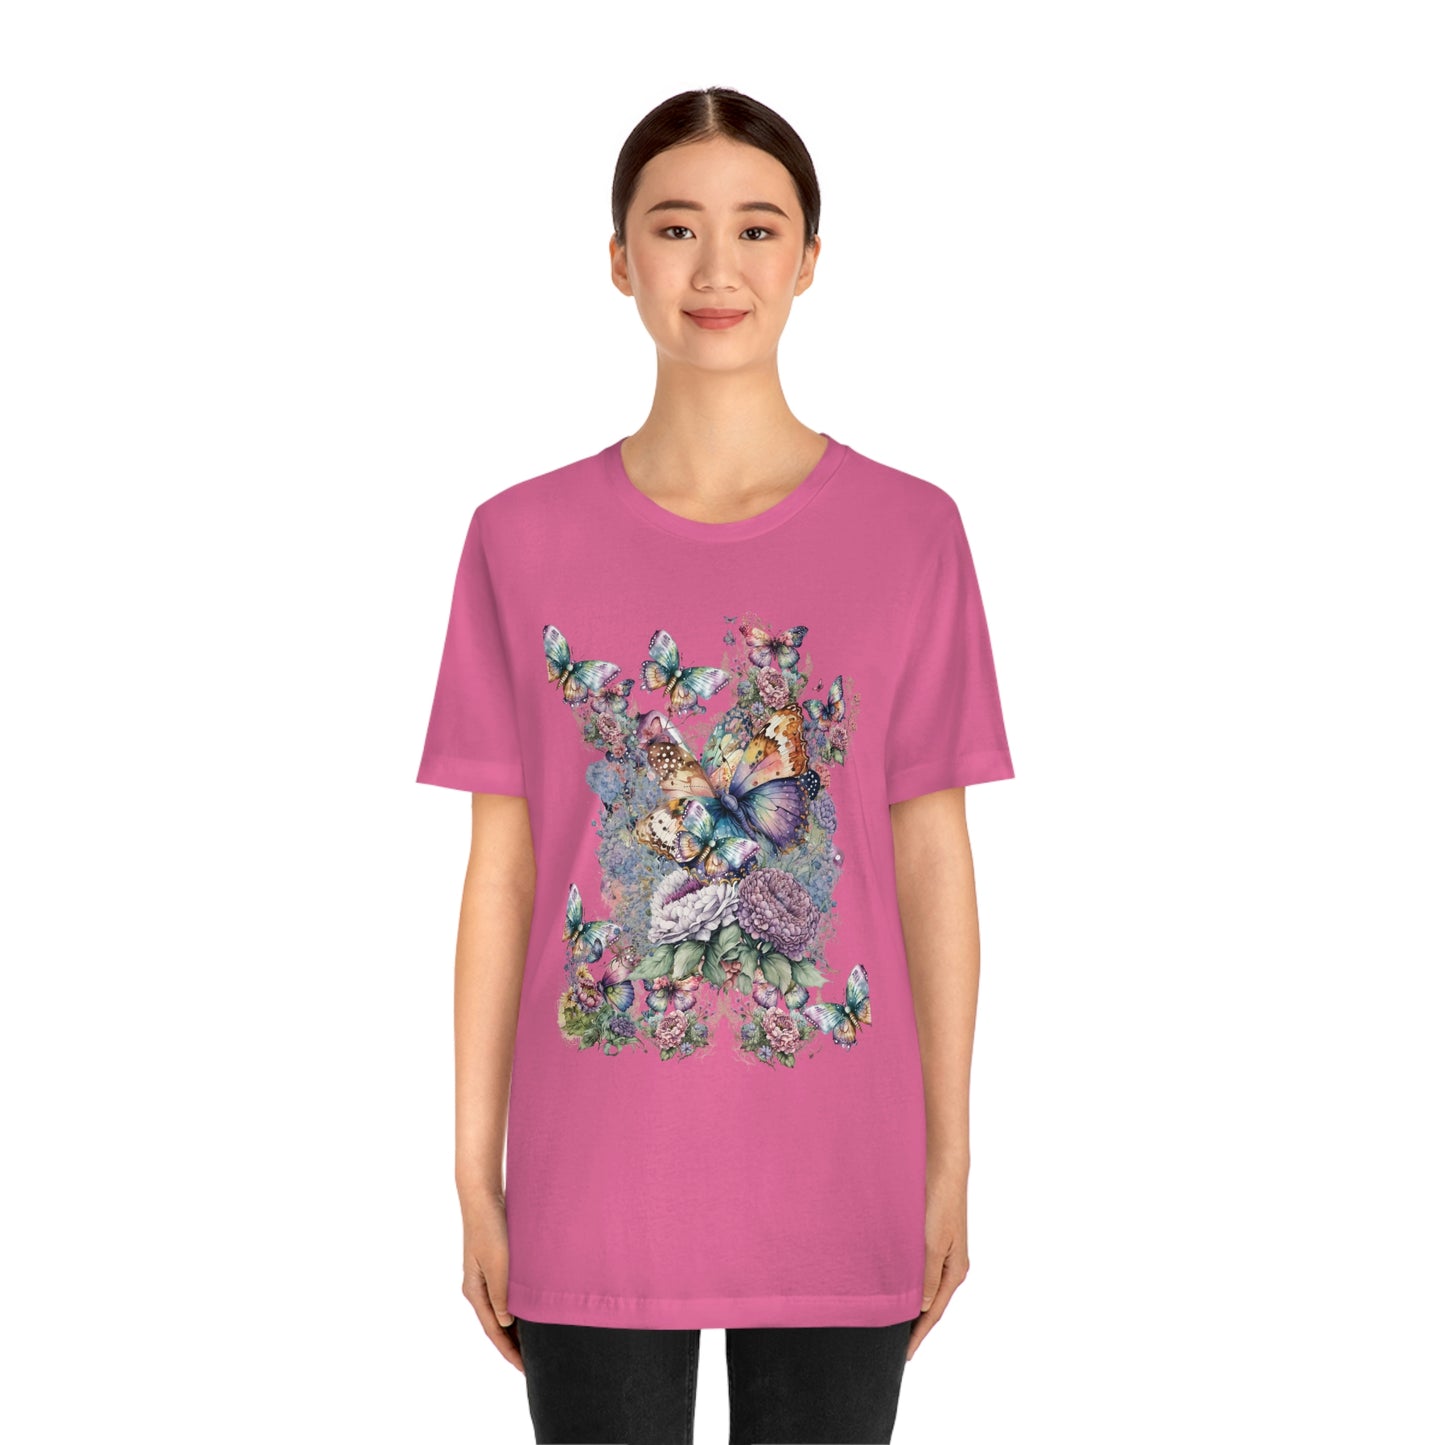 Butterfly Unisex Jersey Short Sleeve Tee, With Butterfly, Entomology Butterfly, Chalcedony Butterfly, Amalee Butterfly, Colorful Butterfly Shirt